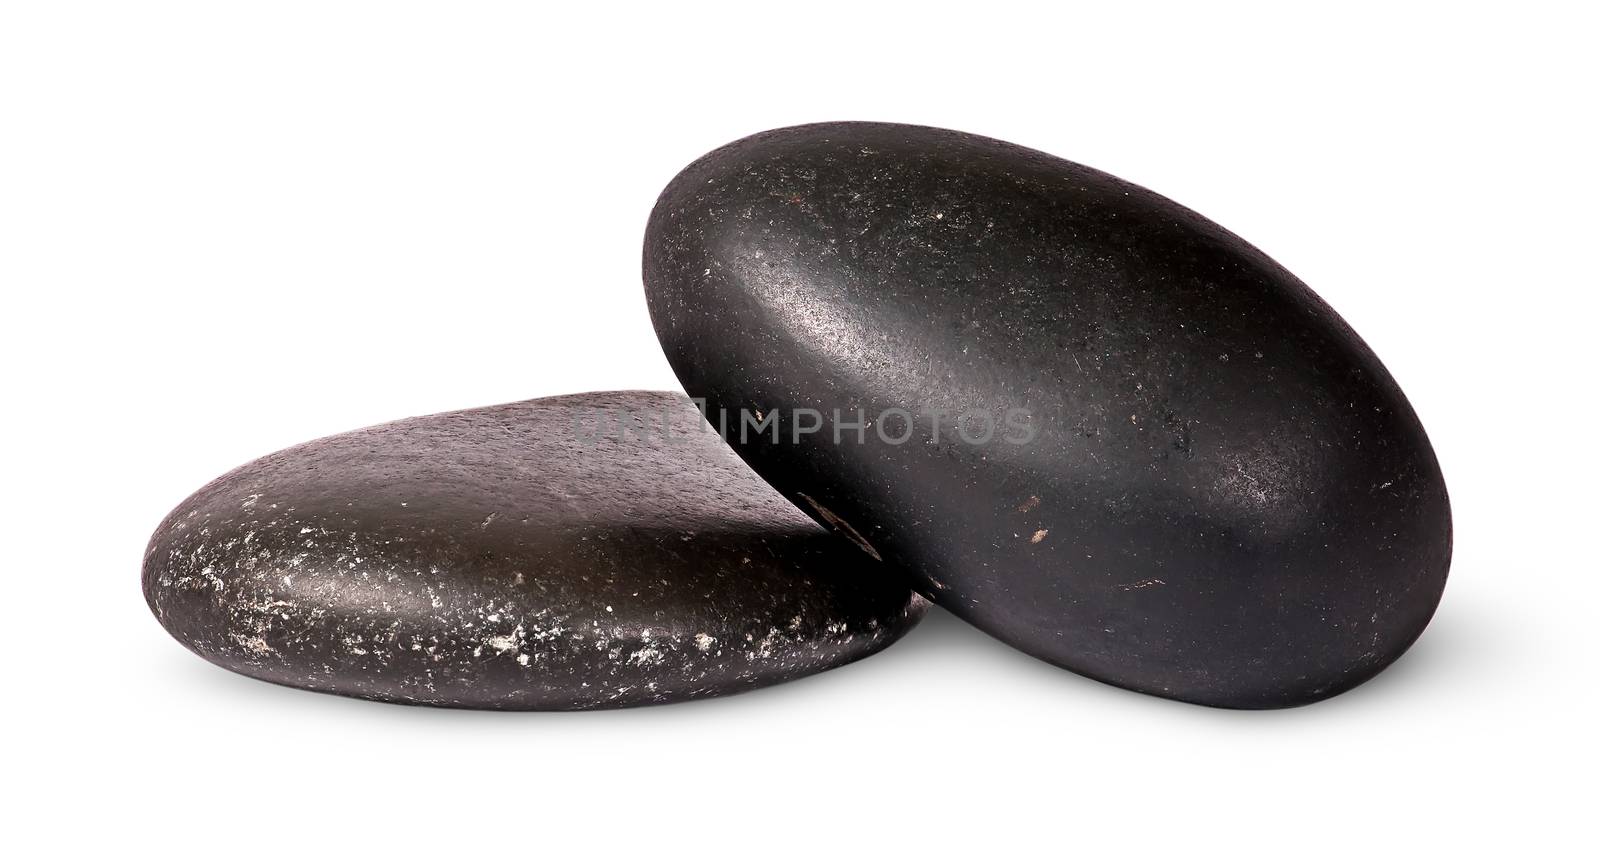 Two black stones for Thai spa isolated on white background